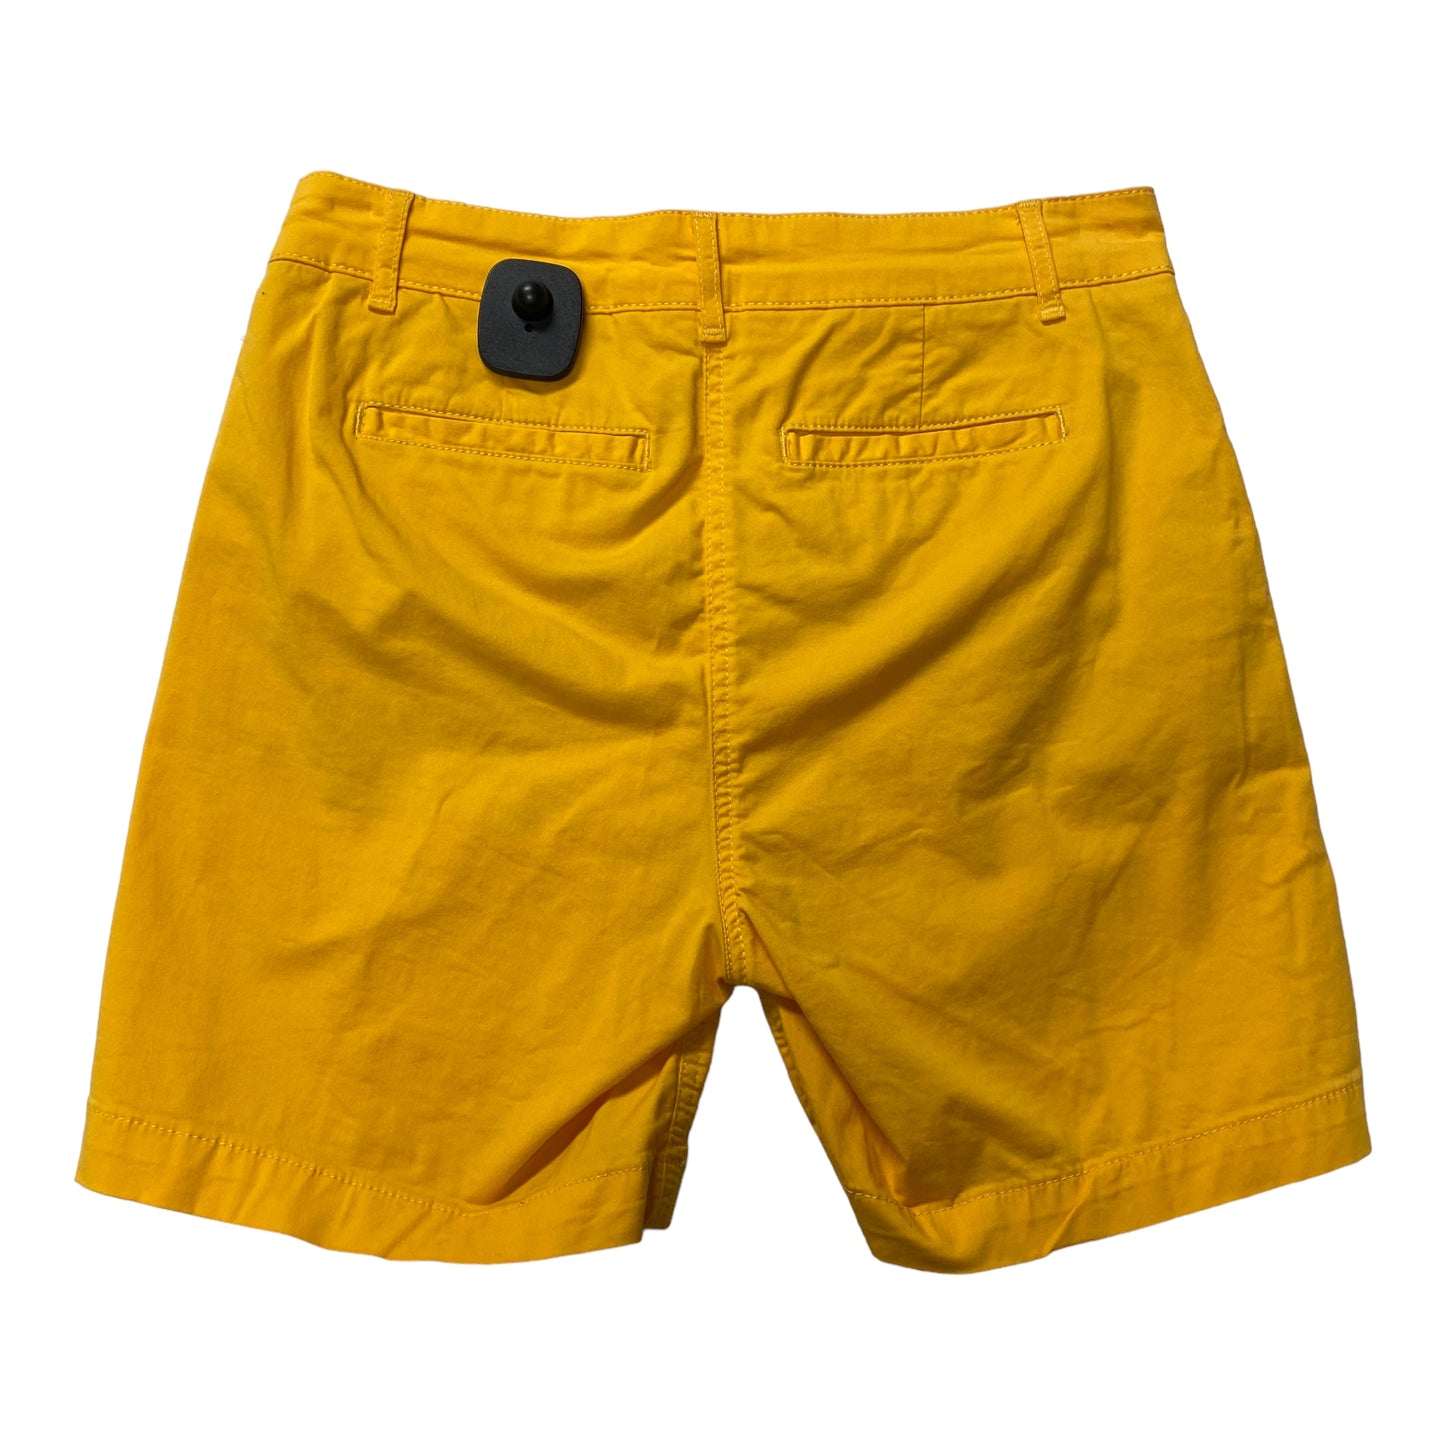 Yellow Shorts Boden, Size 2